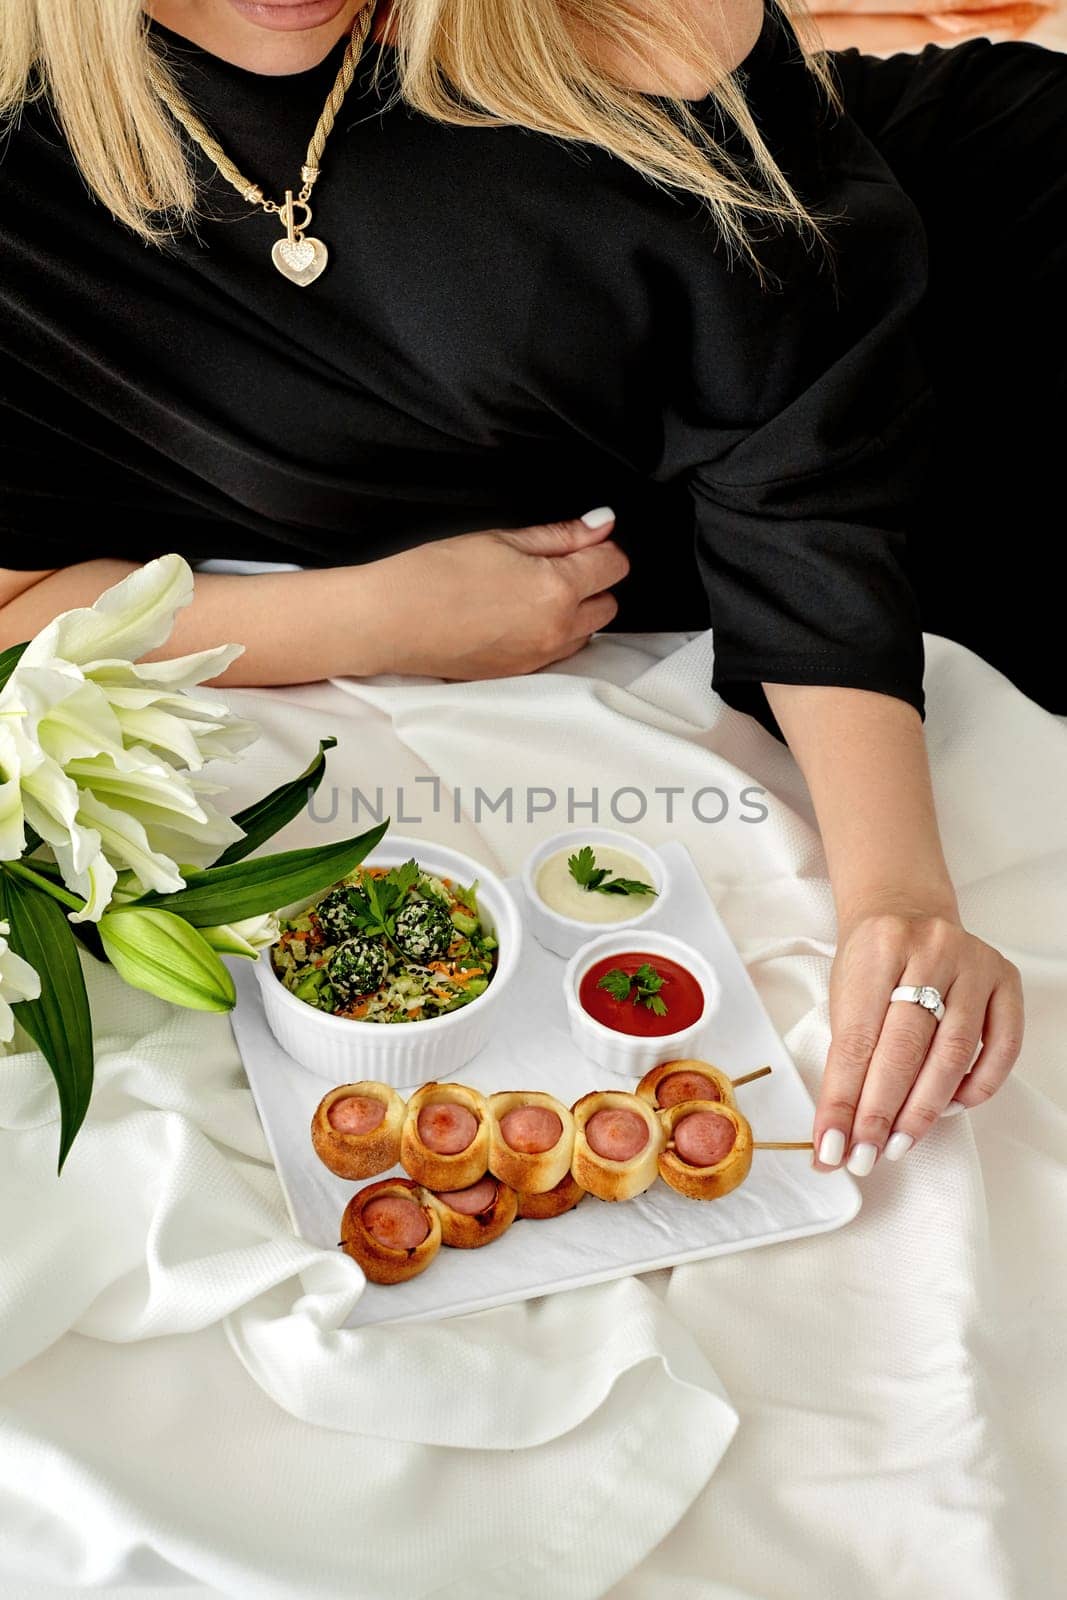 Sophisticated woman relaxing on white bedding with tray of delicious freshly baked sausage rolls, healthy vegetable salad, spicy dipping sauces, and fragrant white lilies. Romantic weekend concept